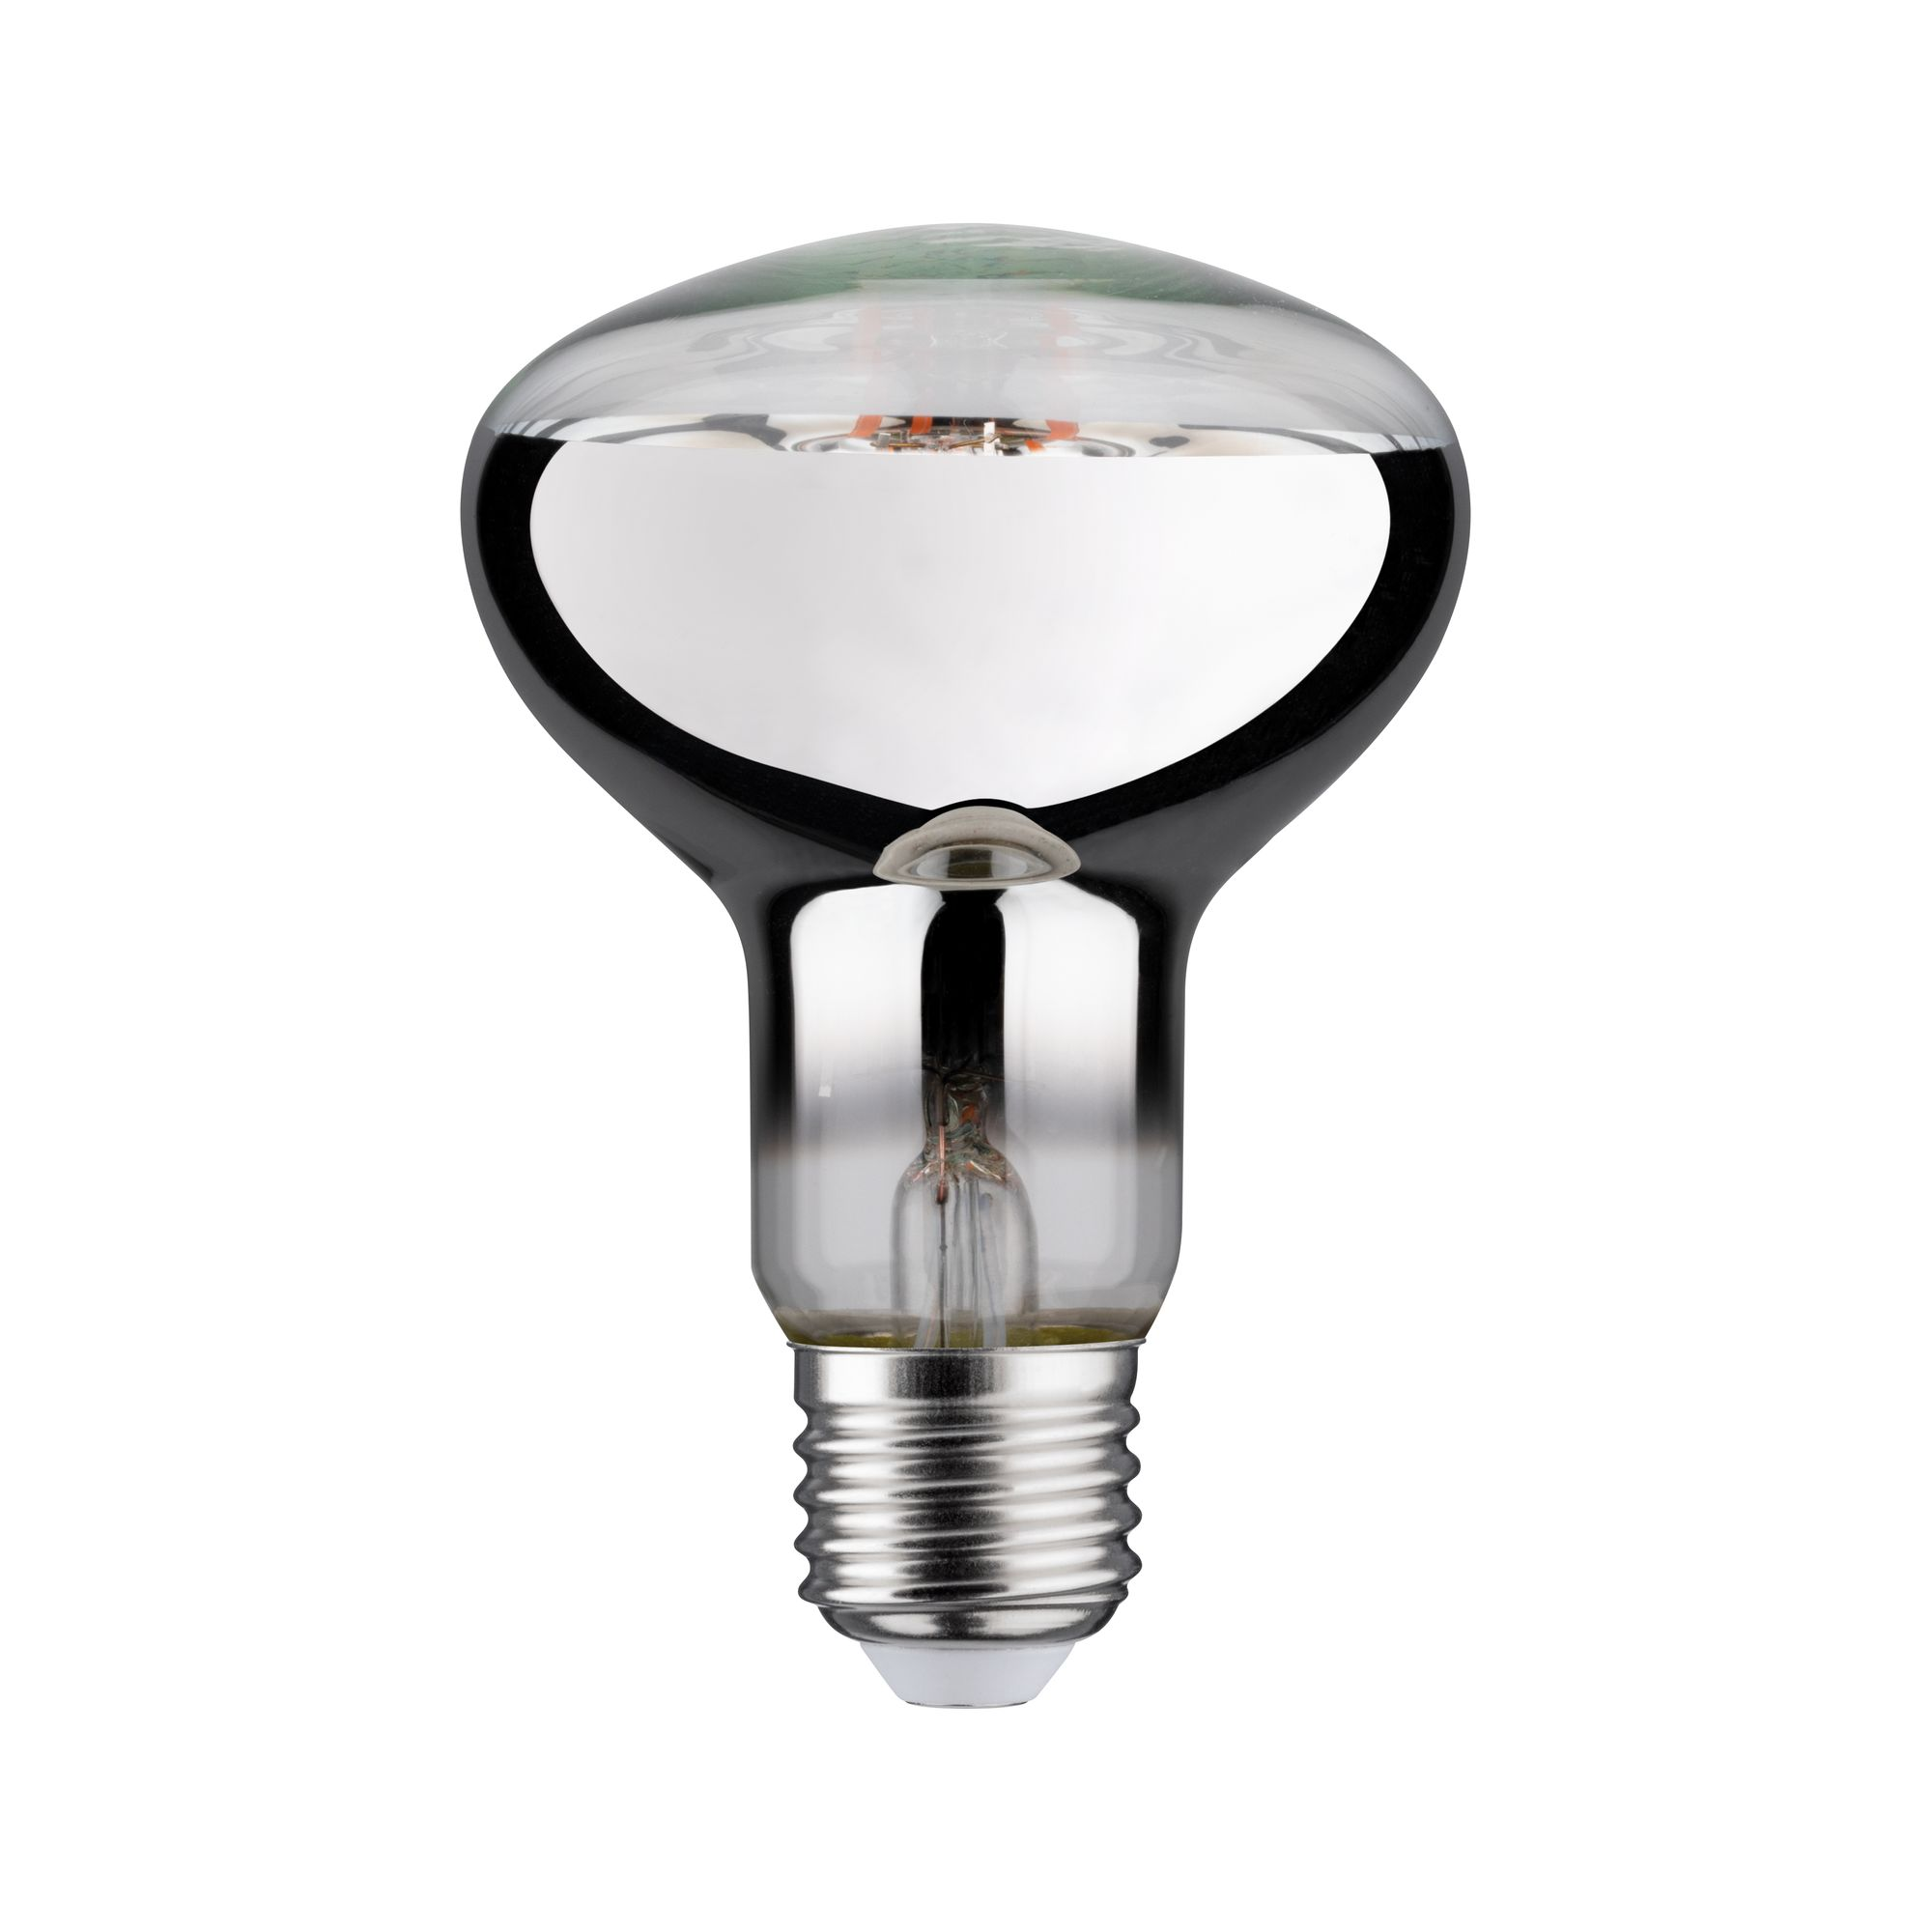 LED-Reflektor Pflanzenlampe E27 6,5 W 200 lm 60° + product picture